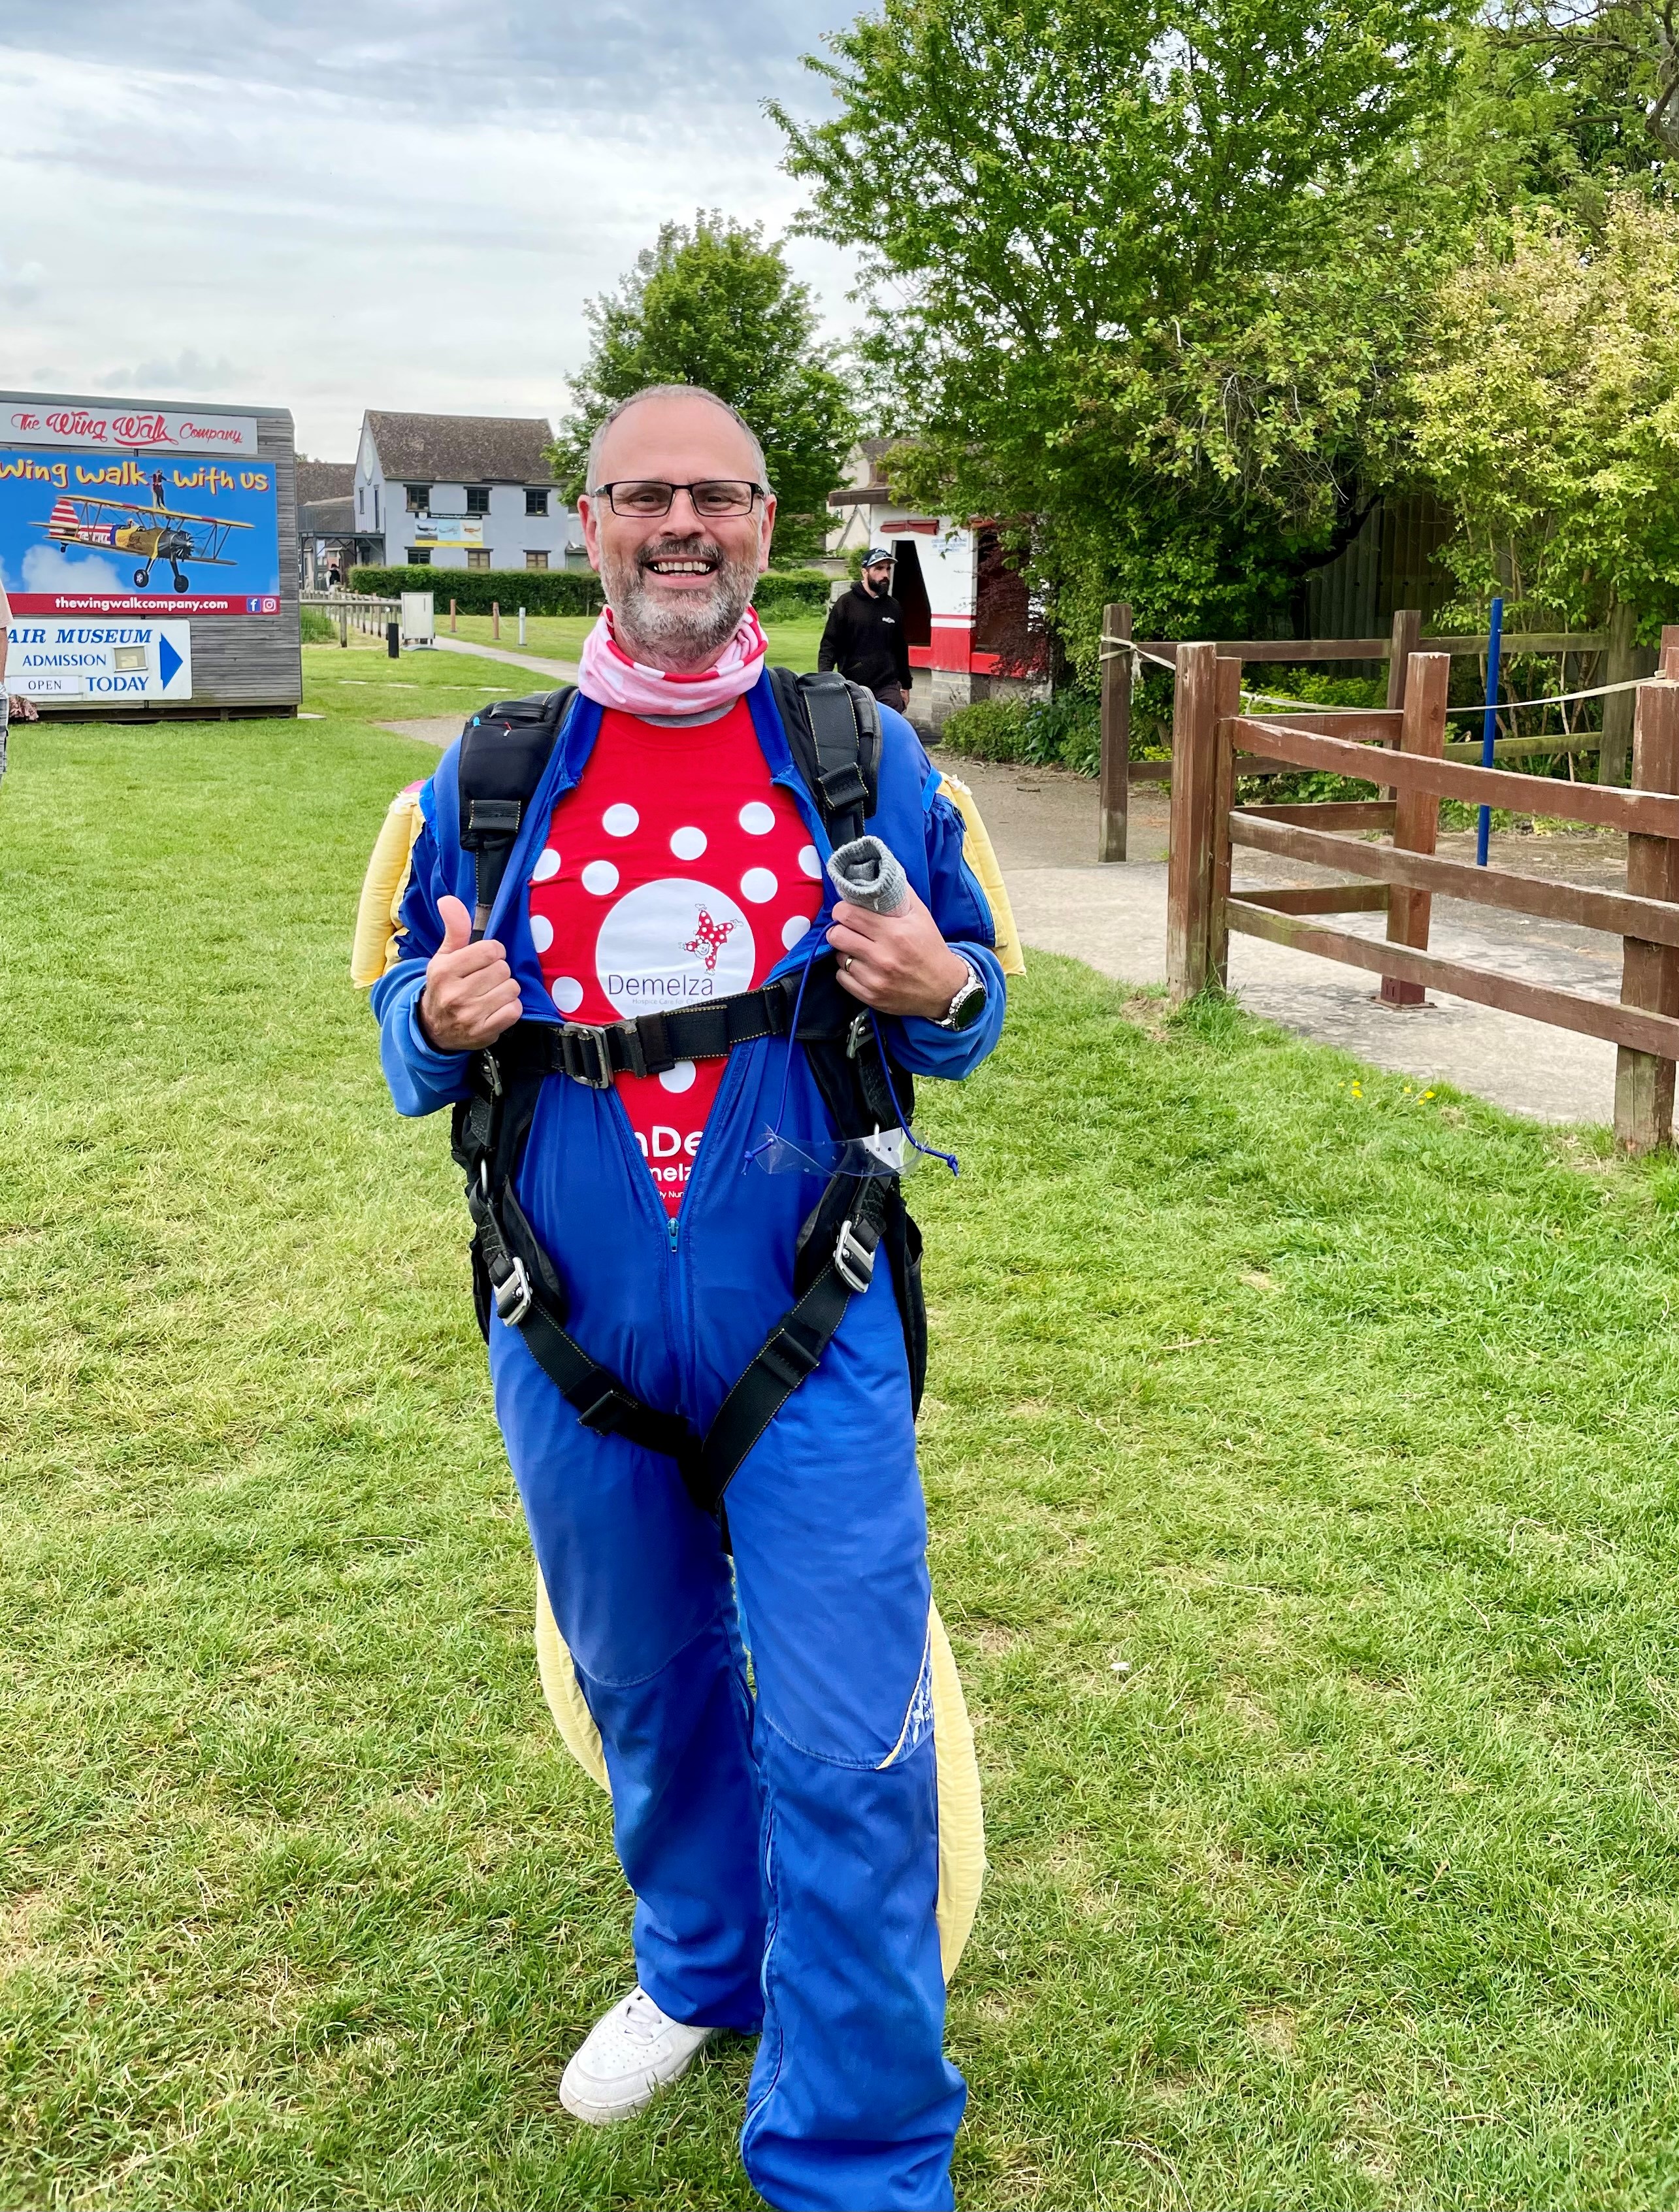 A charity skydiver is wearing his skydive jumpsuit, pulling open the chest to show his Demelza t-shirt underneath.